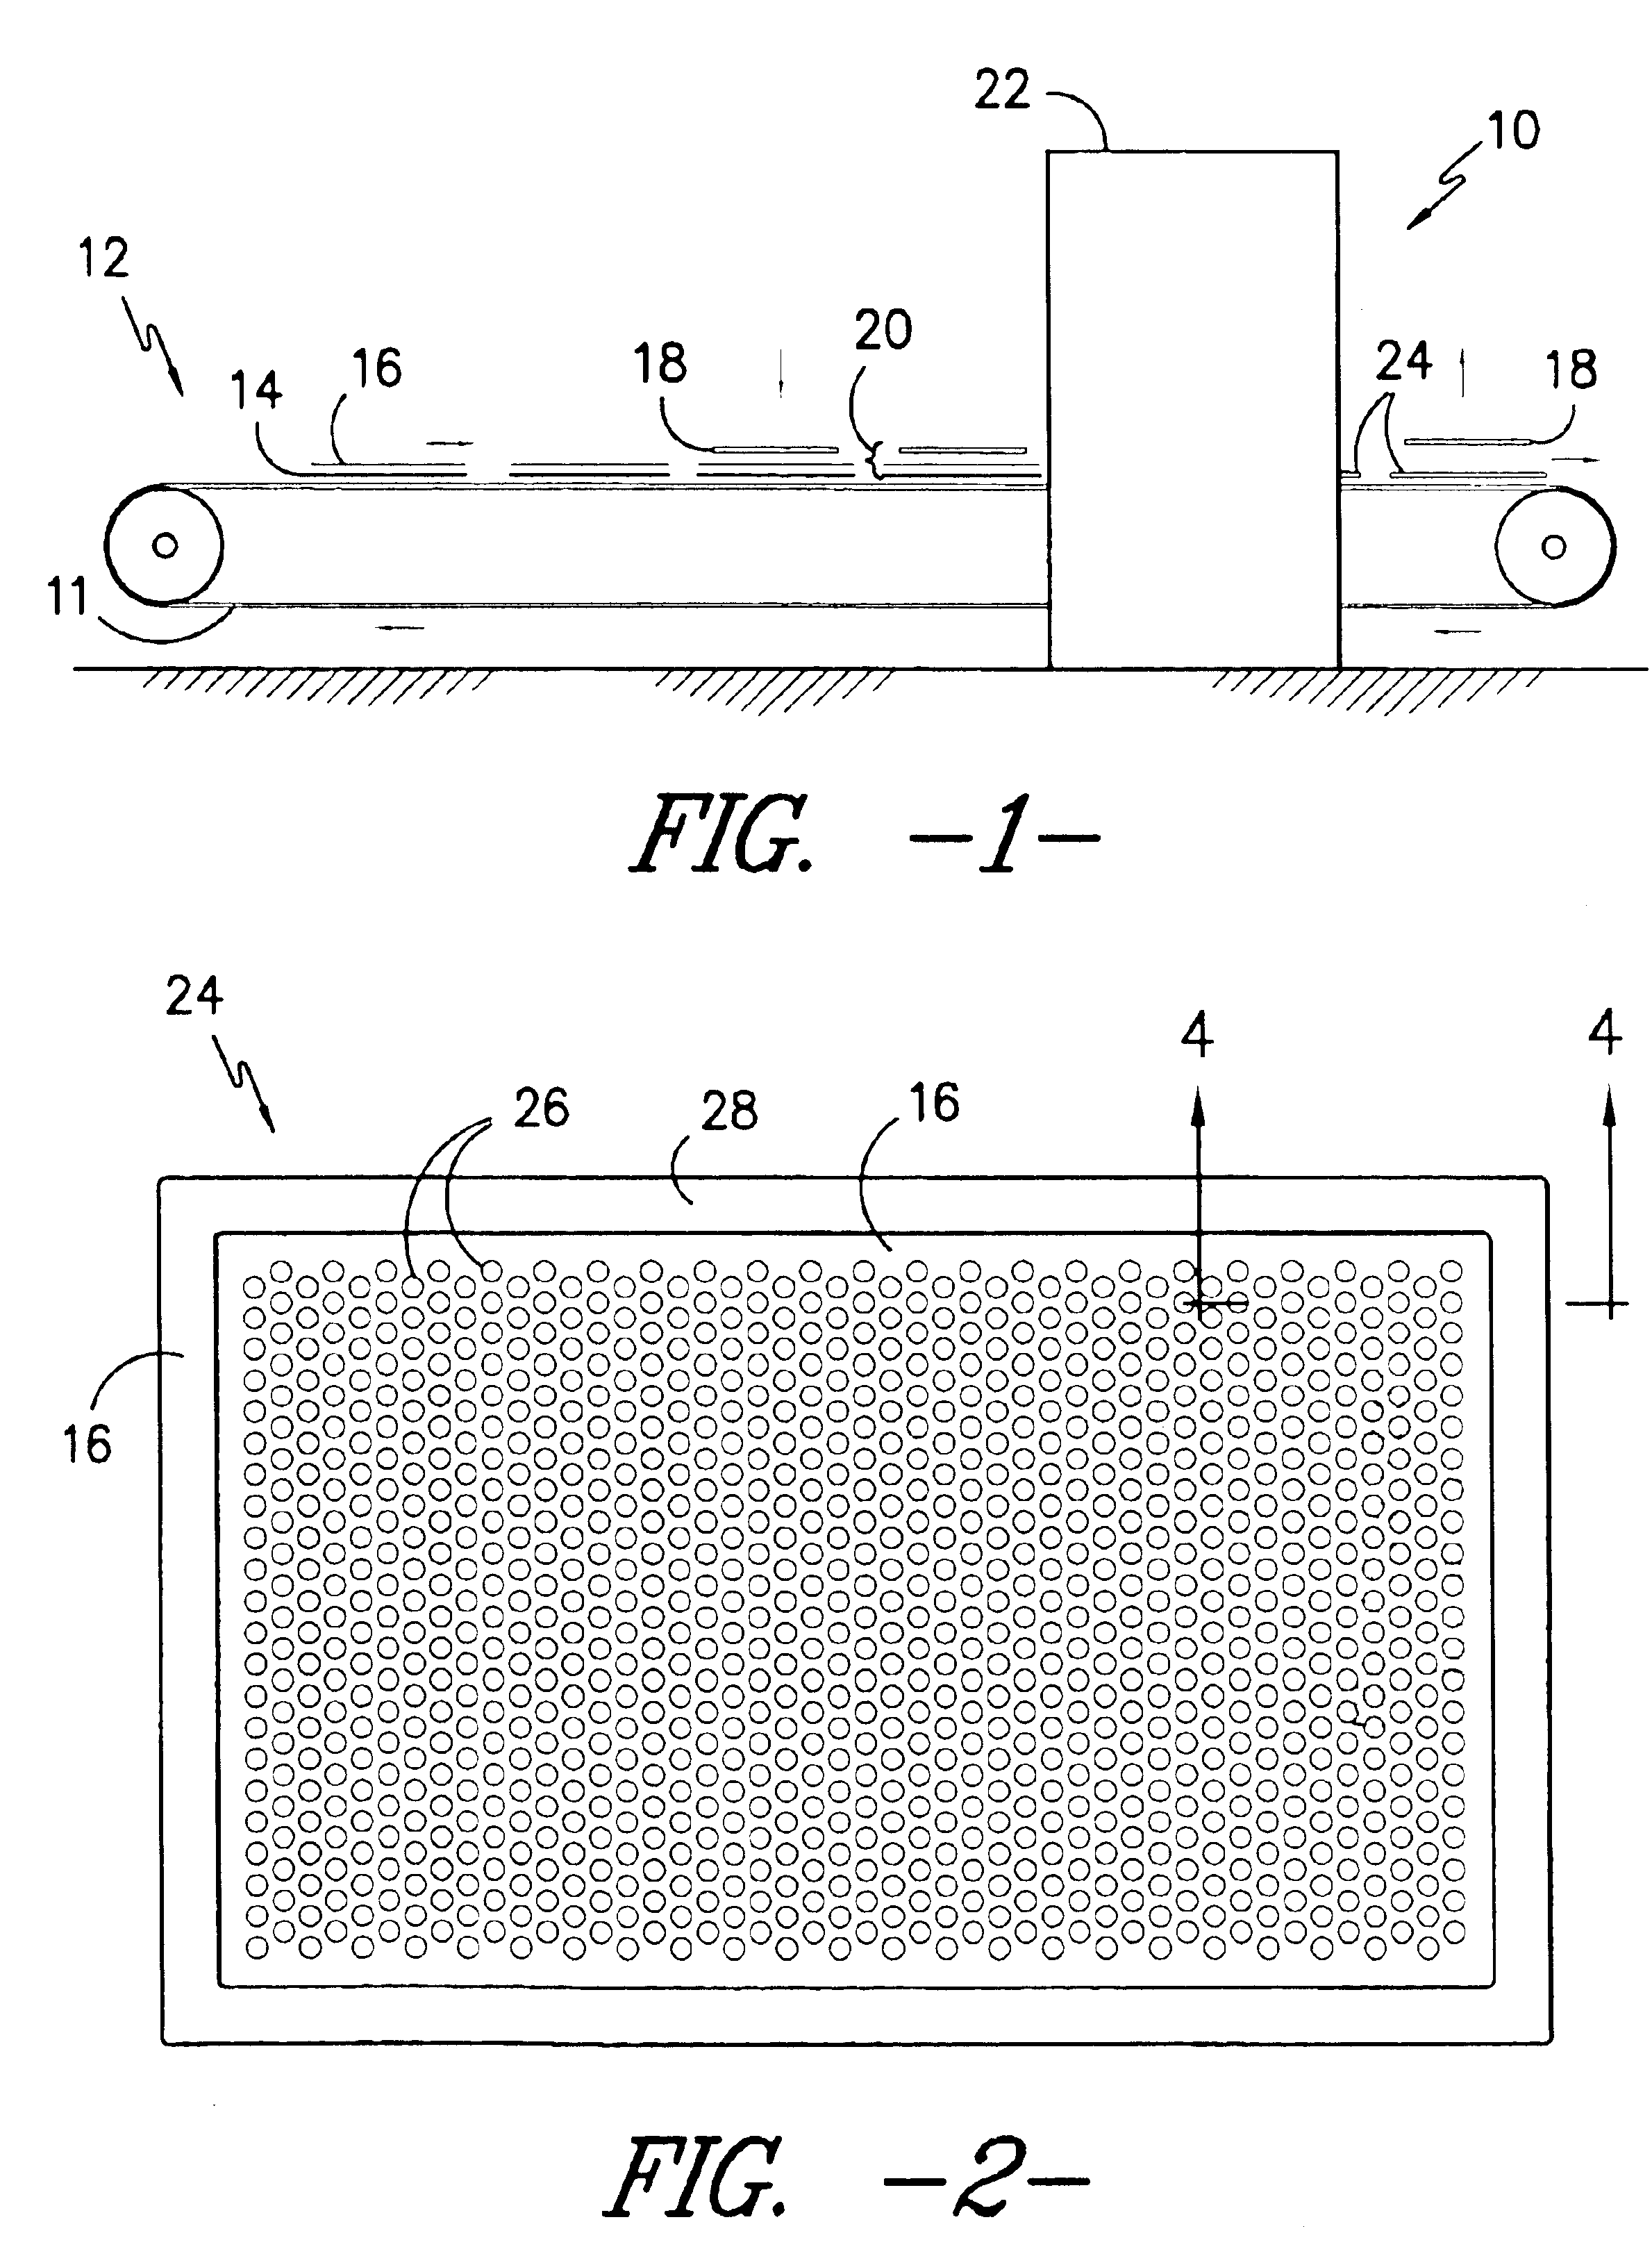 Cushioned rubber floor mat article and method